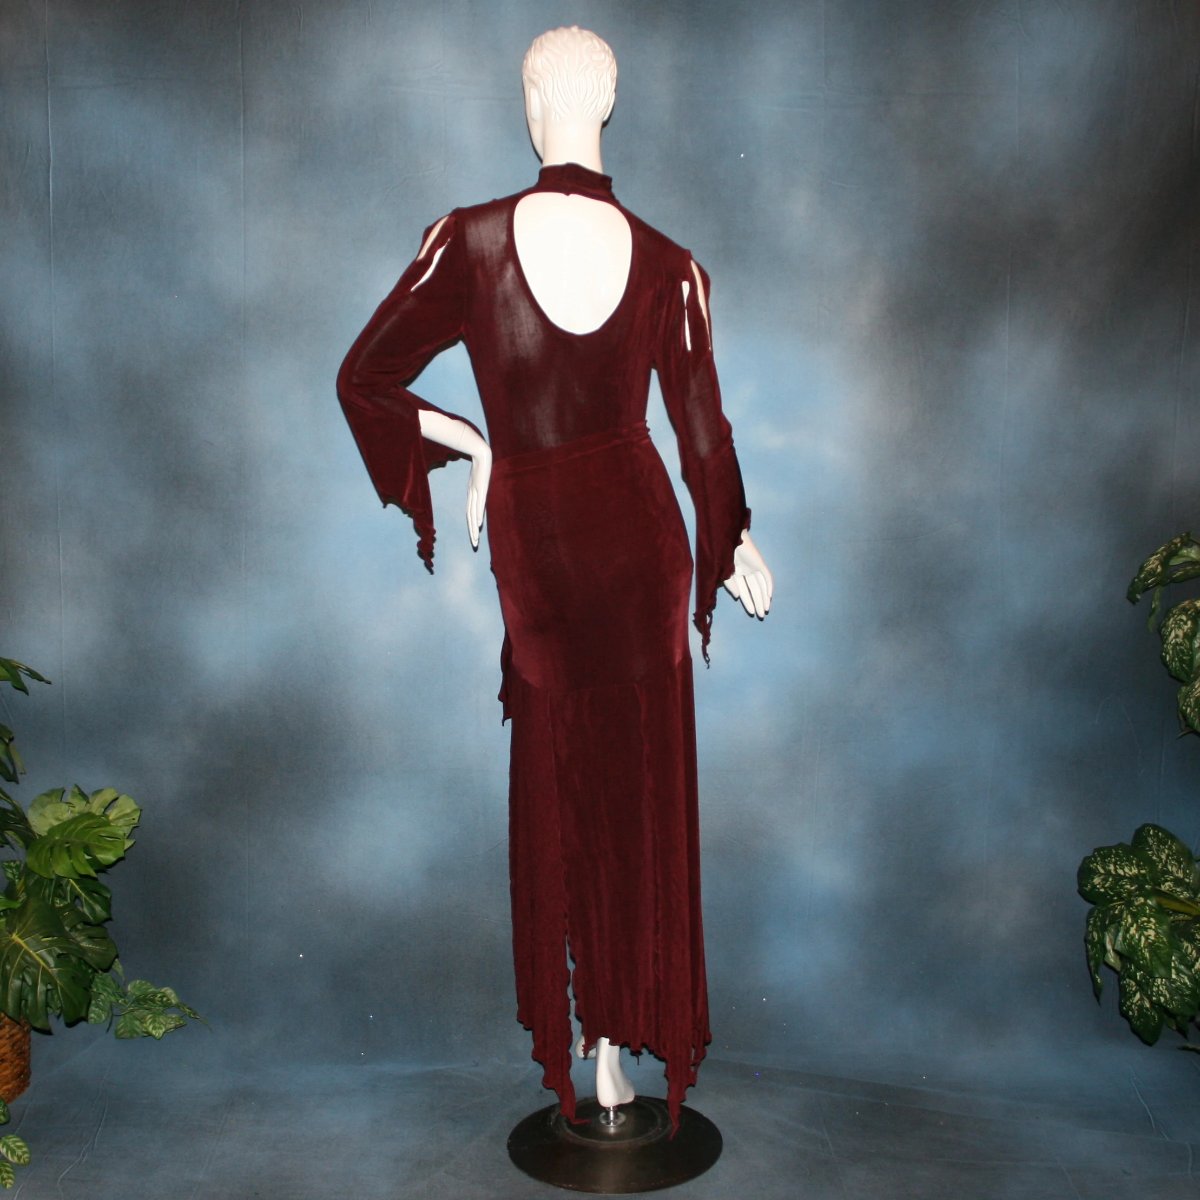 back view of Burgundy sarong style Latin/rhythm paneled skirt, matching bodysuit featuring flared arms with cutout details created of luxurious burgundy solid slinky. Great for any ballroom dance, ballroom dance teachers or social event!